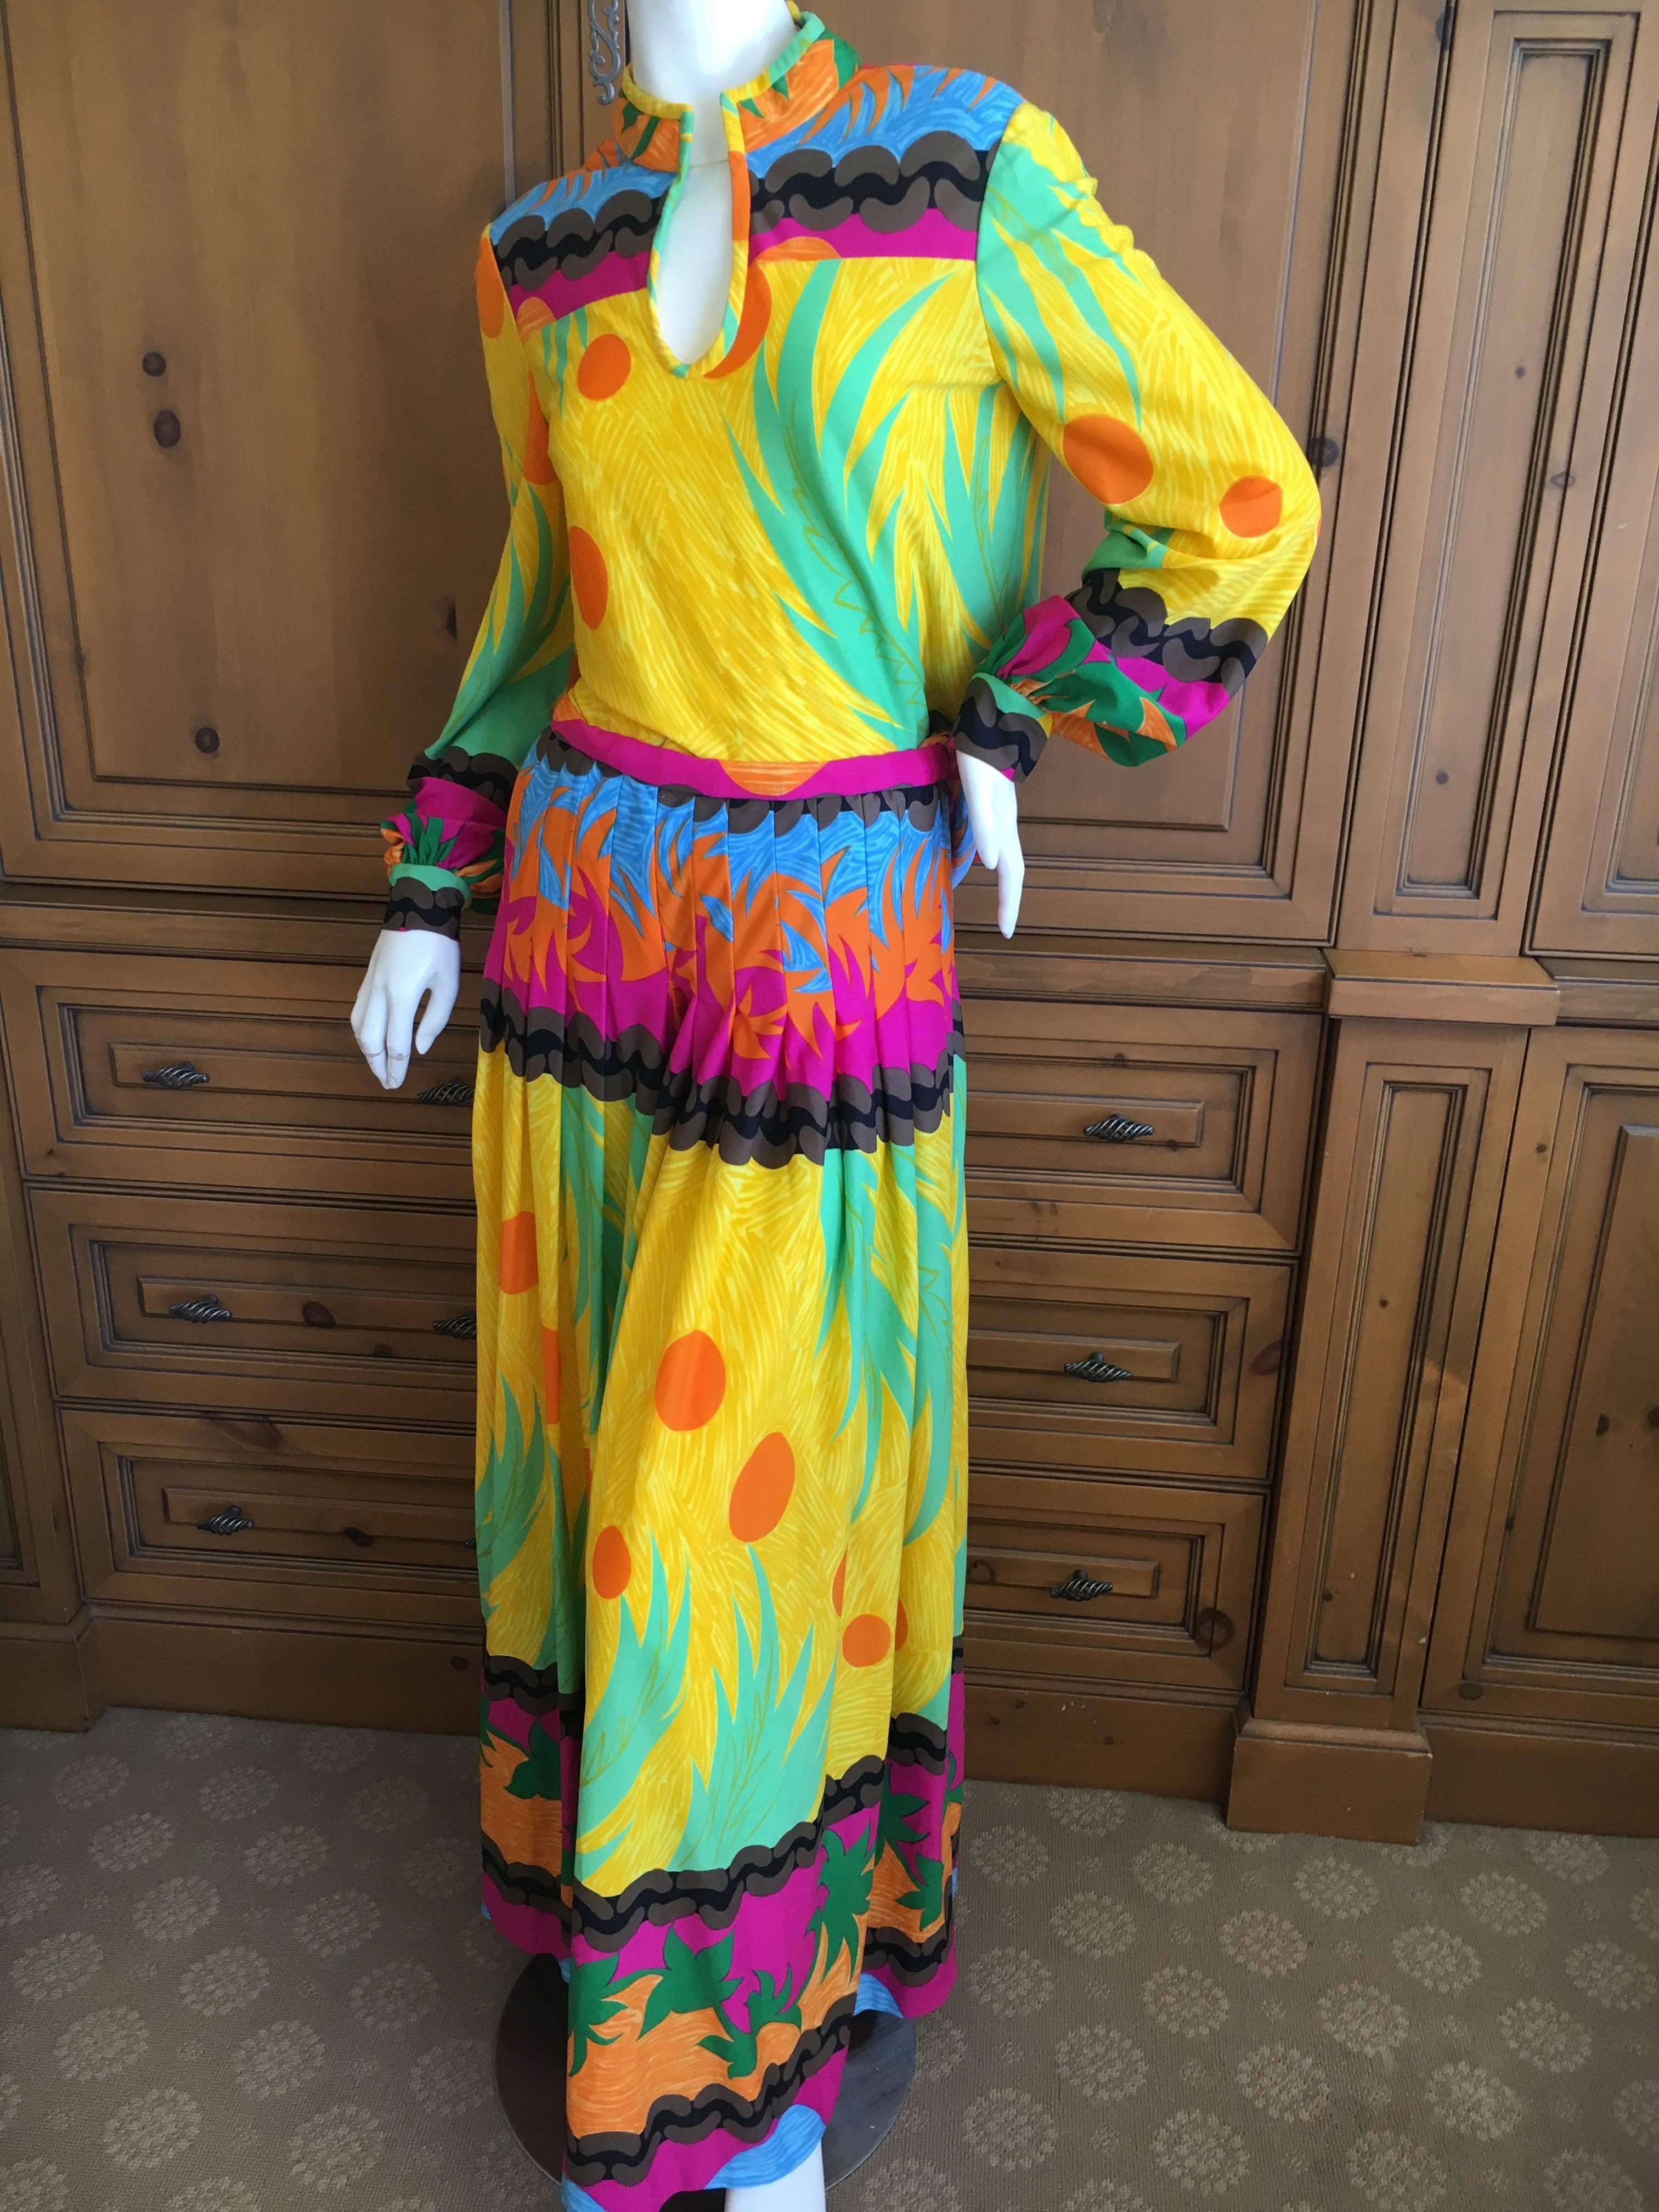 Wonderful hostess ensemble in brilliant colors by Rizkallah for Malcolm Starr featuring a long sleeve top and very voluminous pallazzo plants.
Bust 36